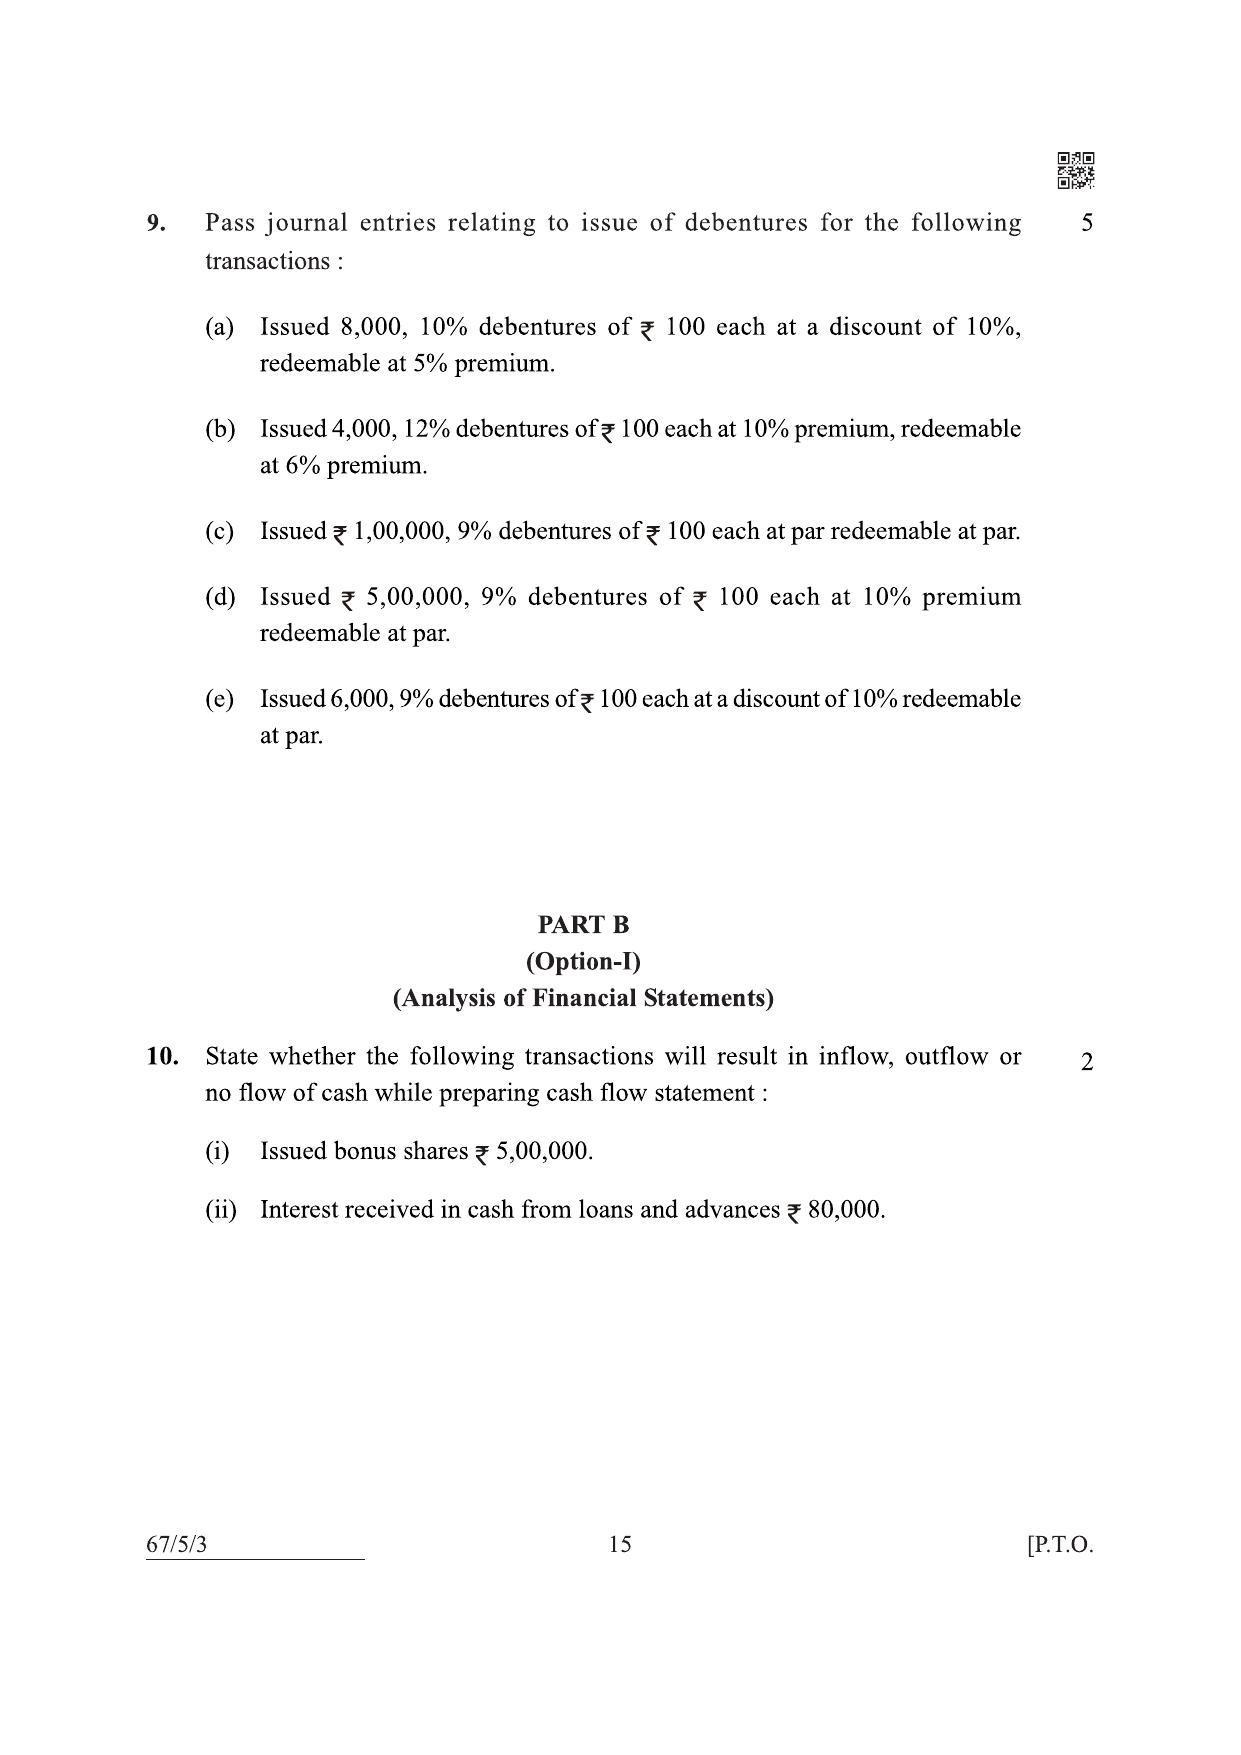 CBSE Class 12 67-5-3 Accountancy 2022 Question Paper - Page 15